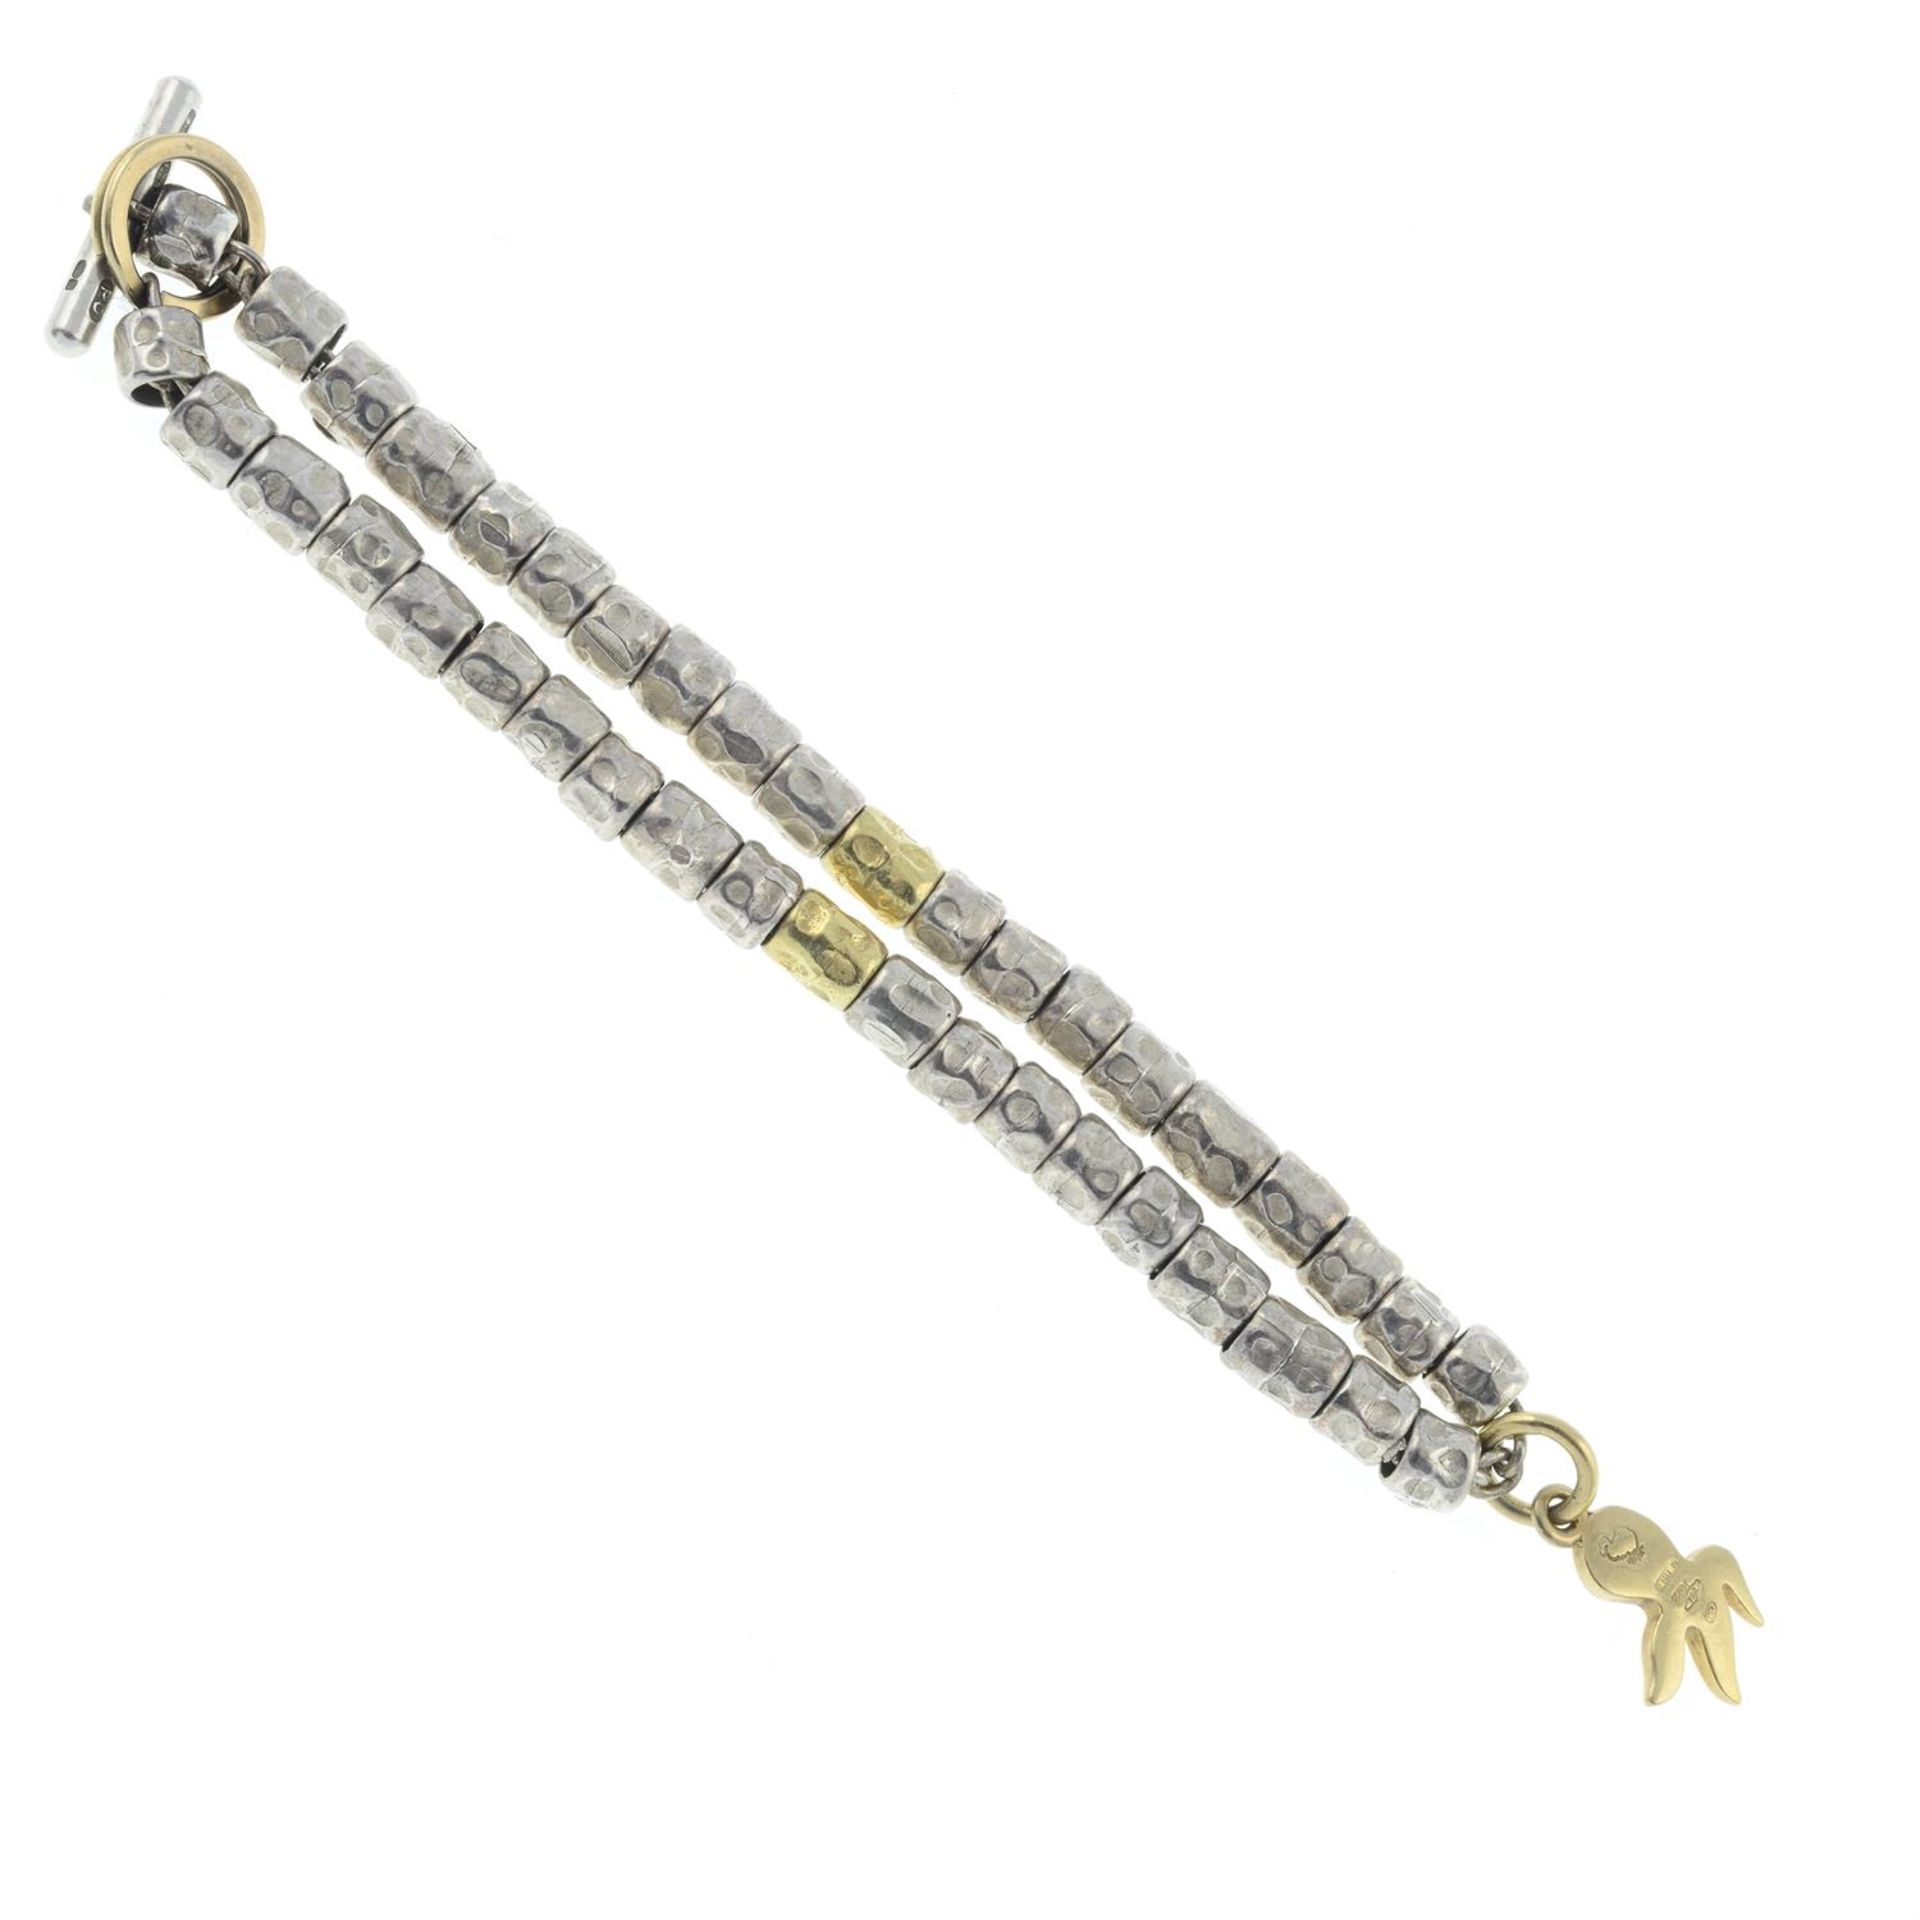 A silver 'Granneli' bracelet, with 18ct gold octopus charm, by Dodo. - Image 2 of 2